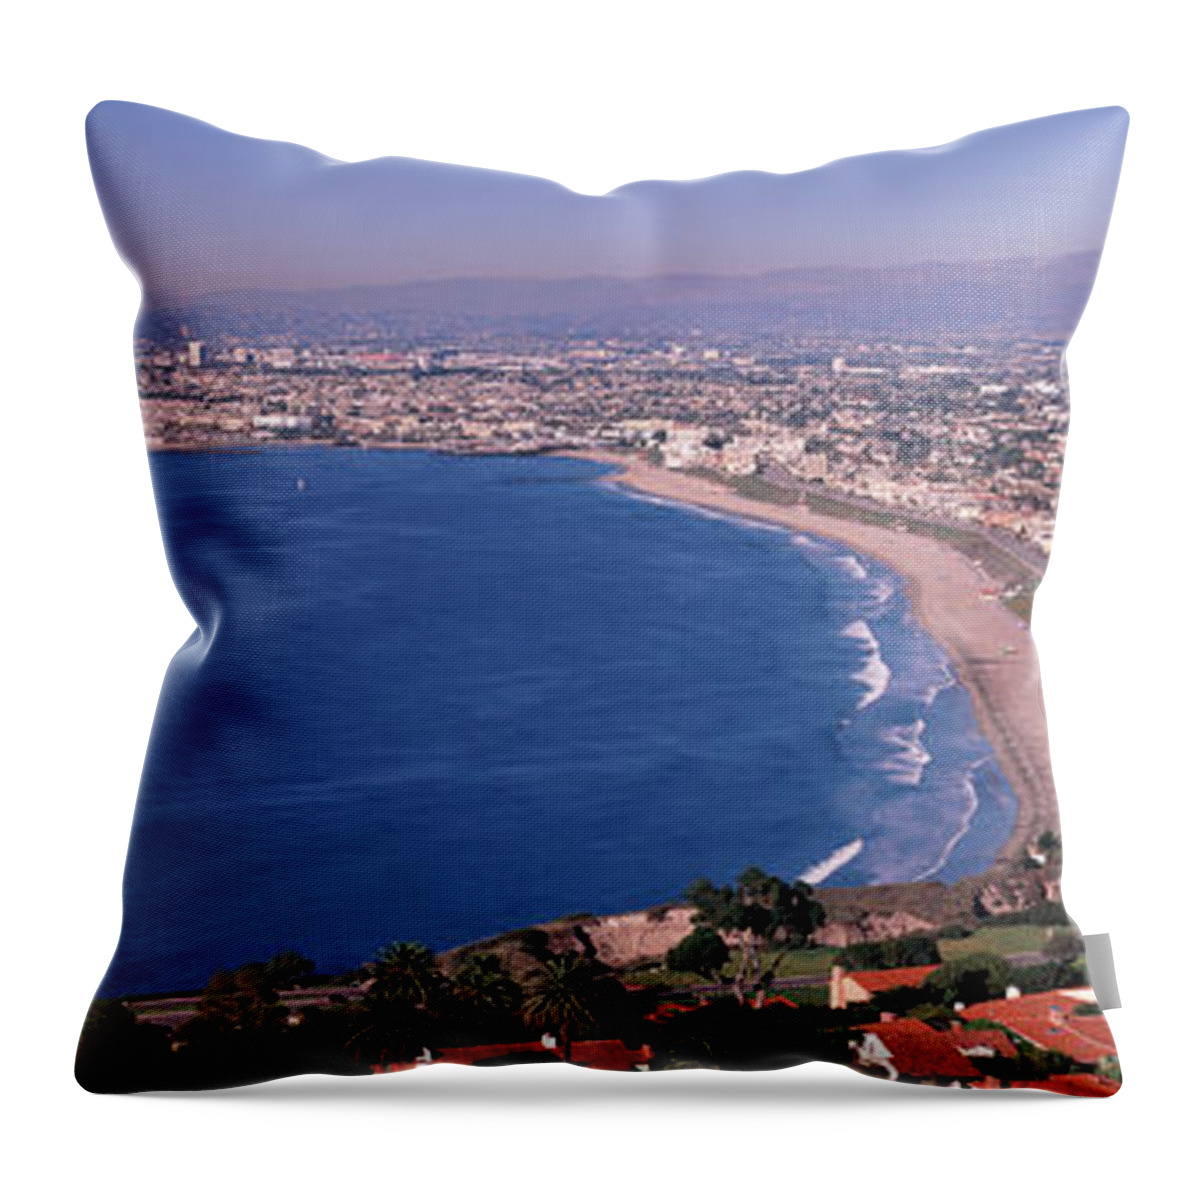 Photography Throw Pillow featuring the photograph Aerial View Of A City At Coast, Santa by Panoramic Images